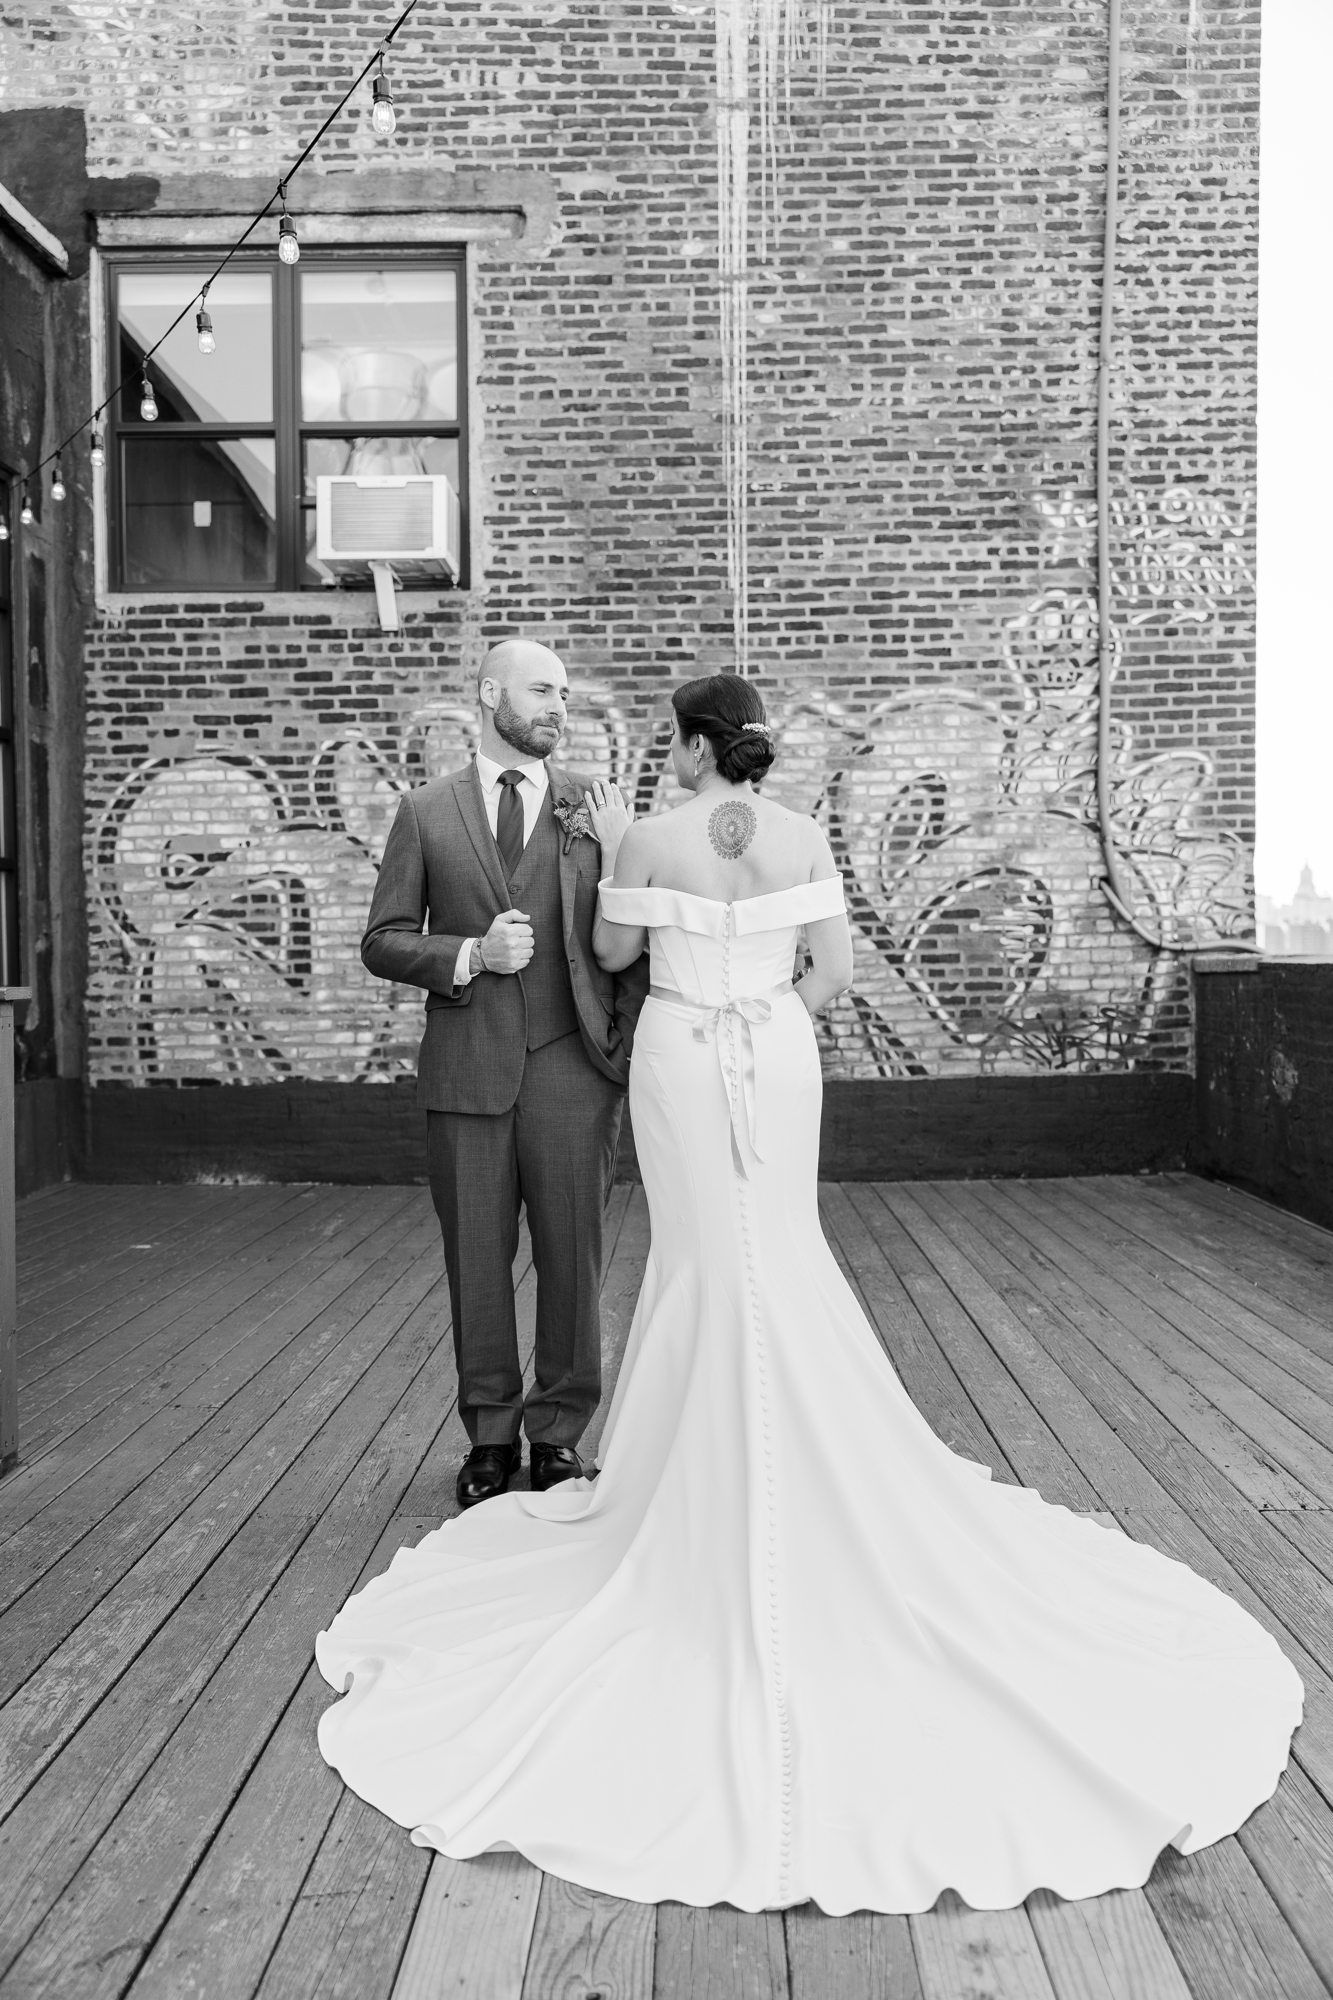 Awesome Wedding Photos at Greenpoint Loft in Brooklyn